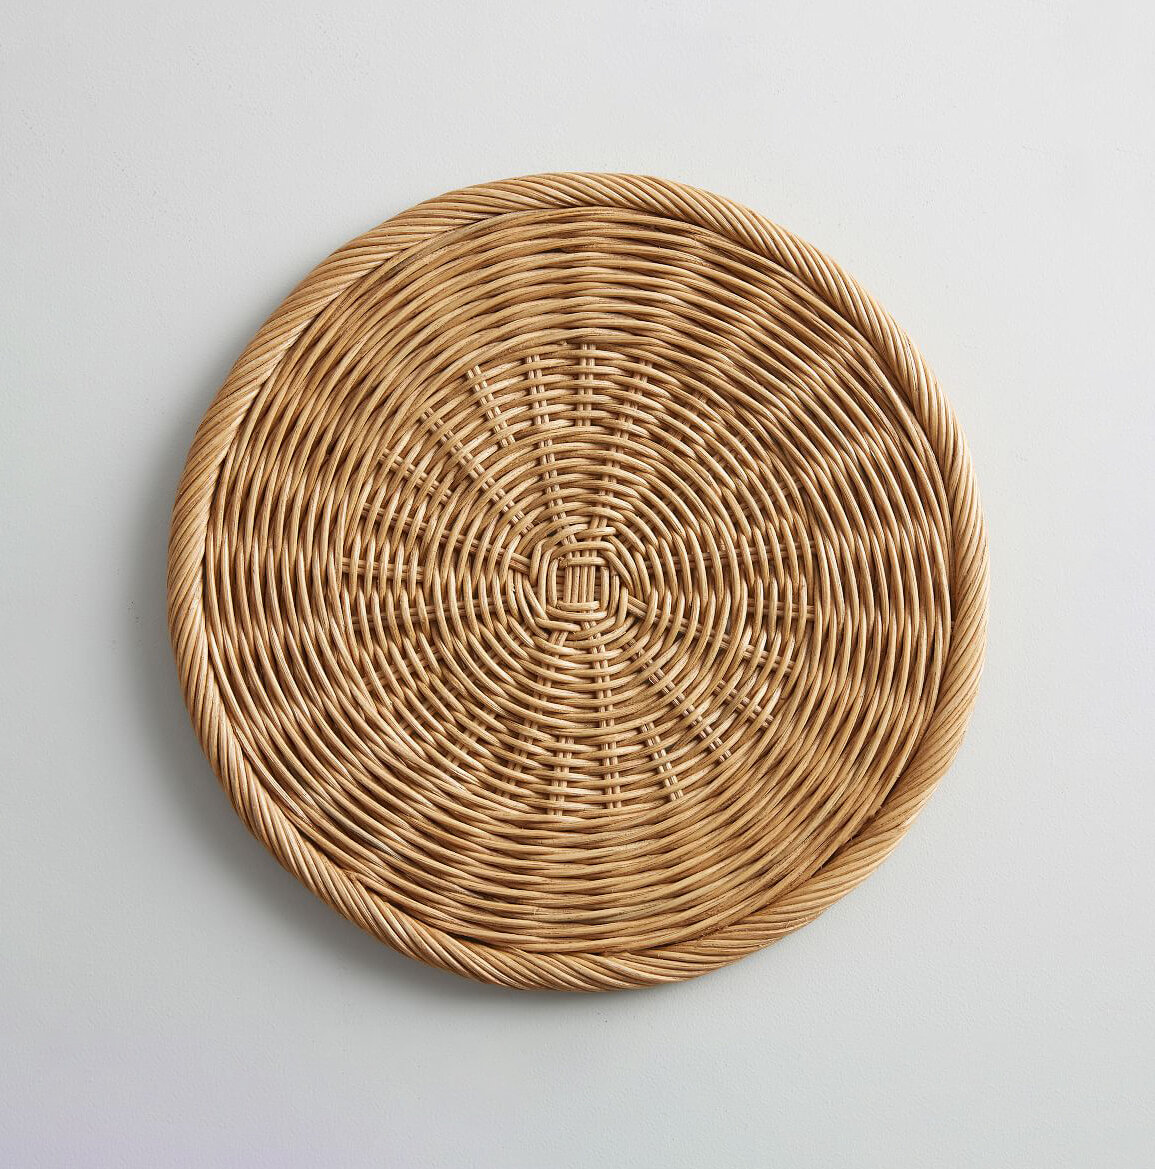 willow-wicker-charger-plate-natural-1-z.jpeg